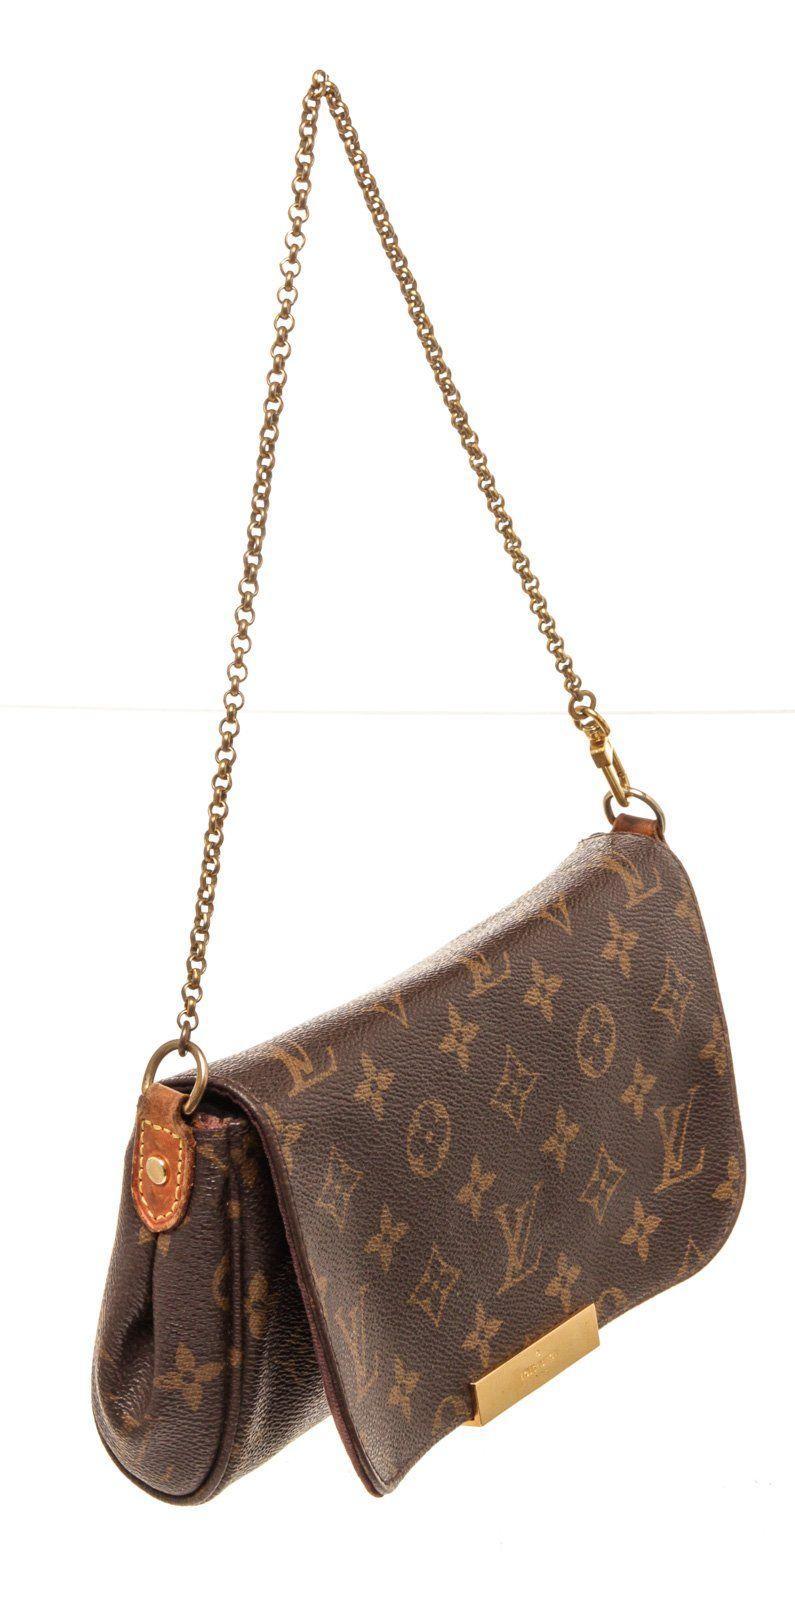 Louis Vuitton Favorite PM Brown Monogram Canvas Cross Body Bag with material Monogram Canvas, gold-tone hardware, interior slip pocket, Removeable strap and flap closure.

44103MSA